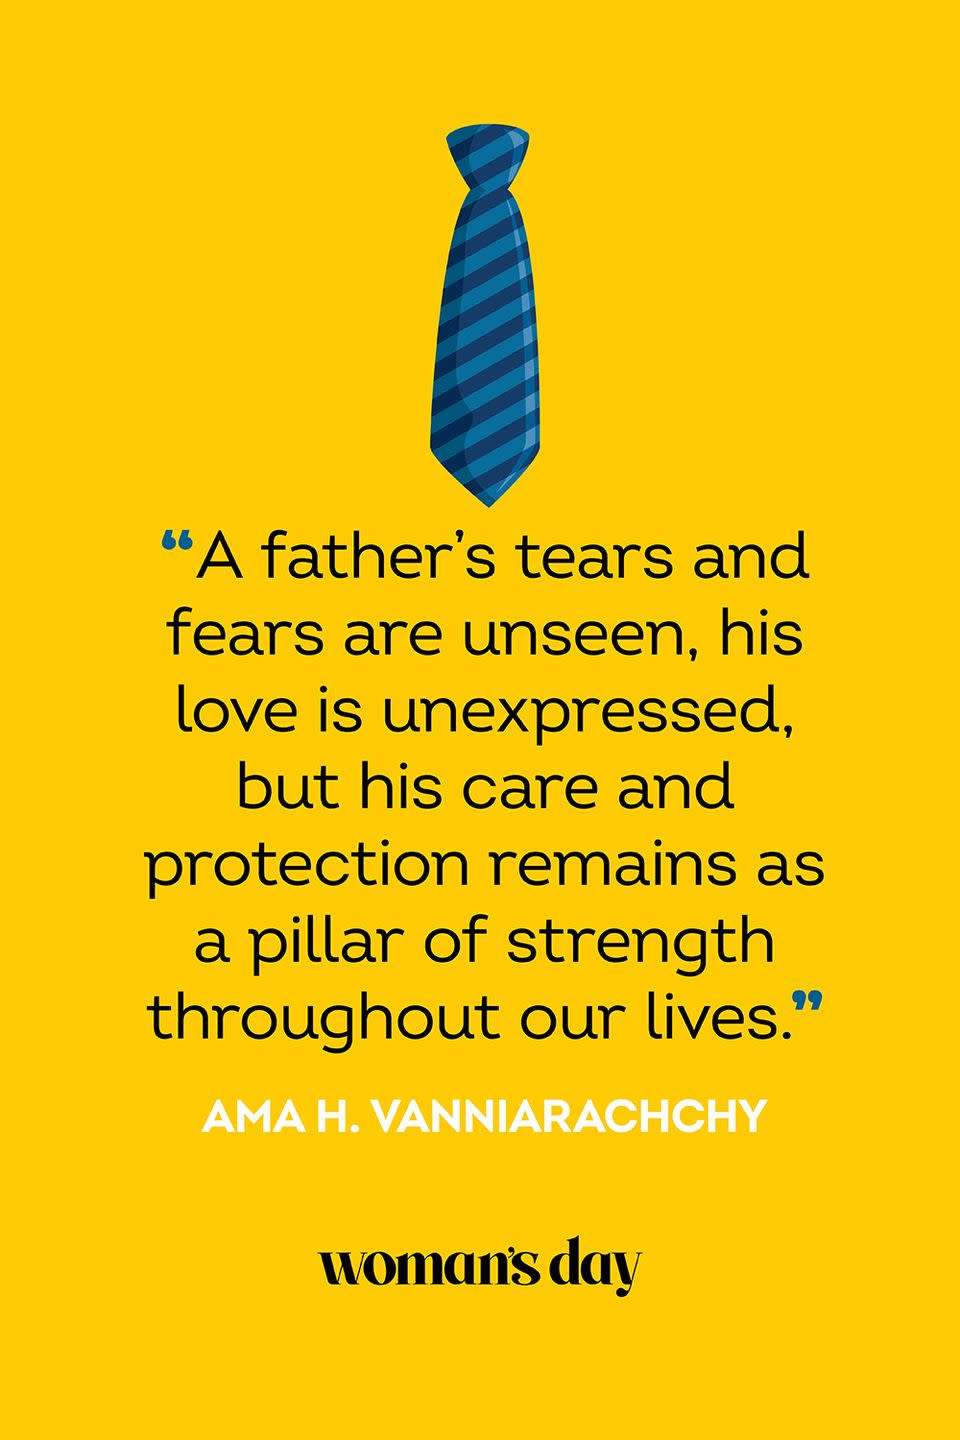 fathers day quotes ama h vanniarachchy